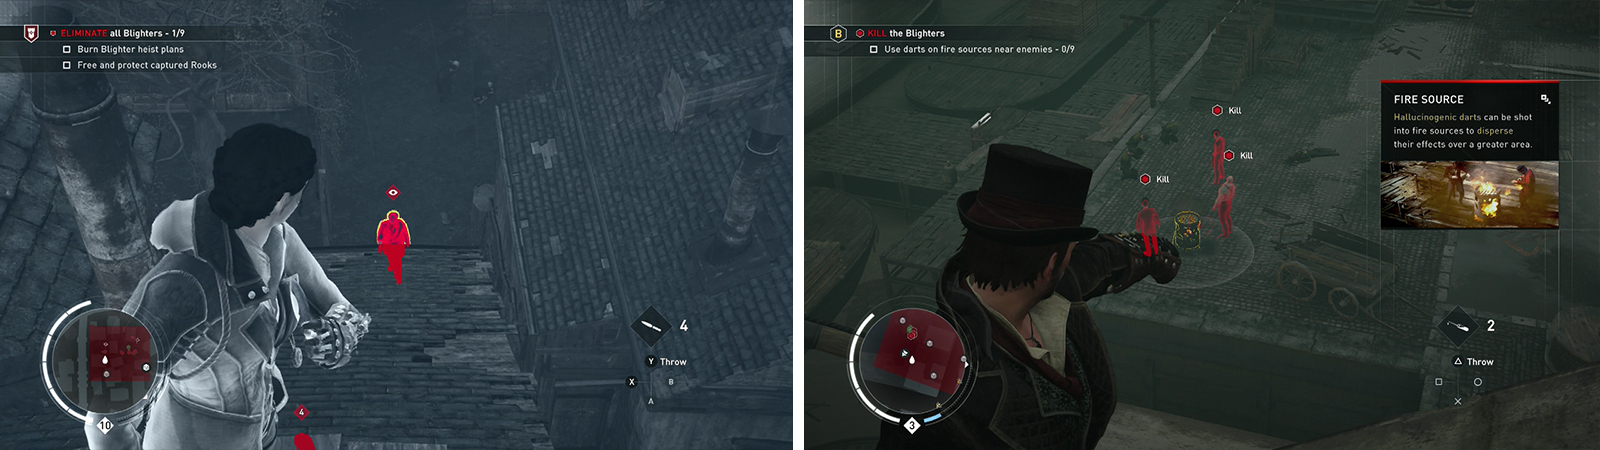 Throwing knives are effective at picking off enemies stealthily (left). The darts can be shot into fire barrels to effect enemies within range (right).